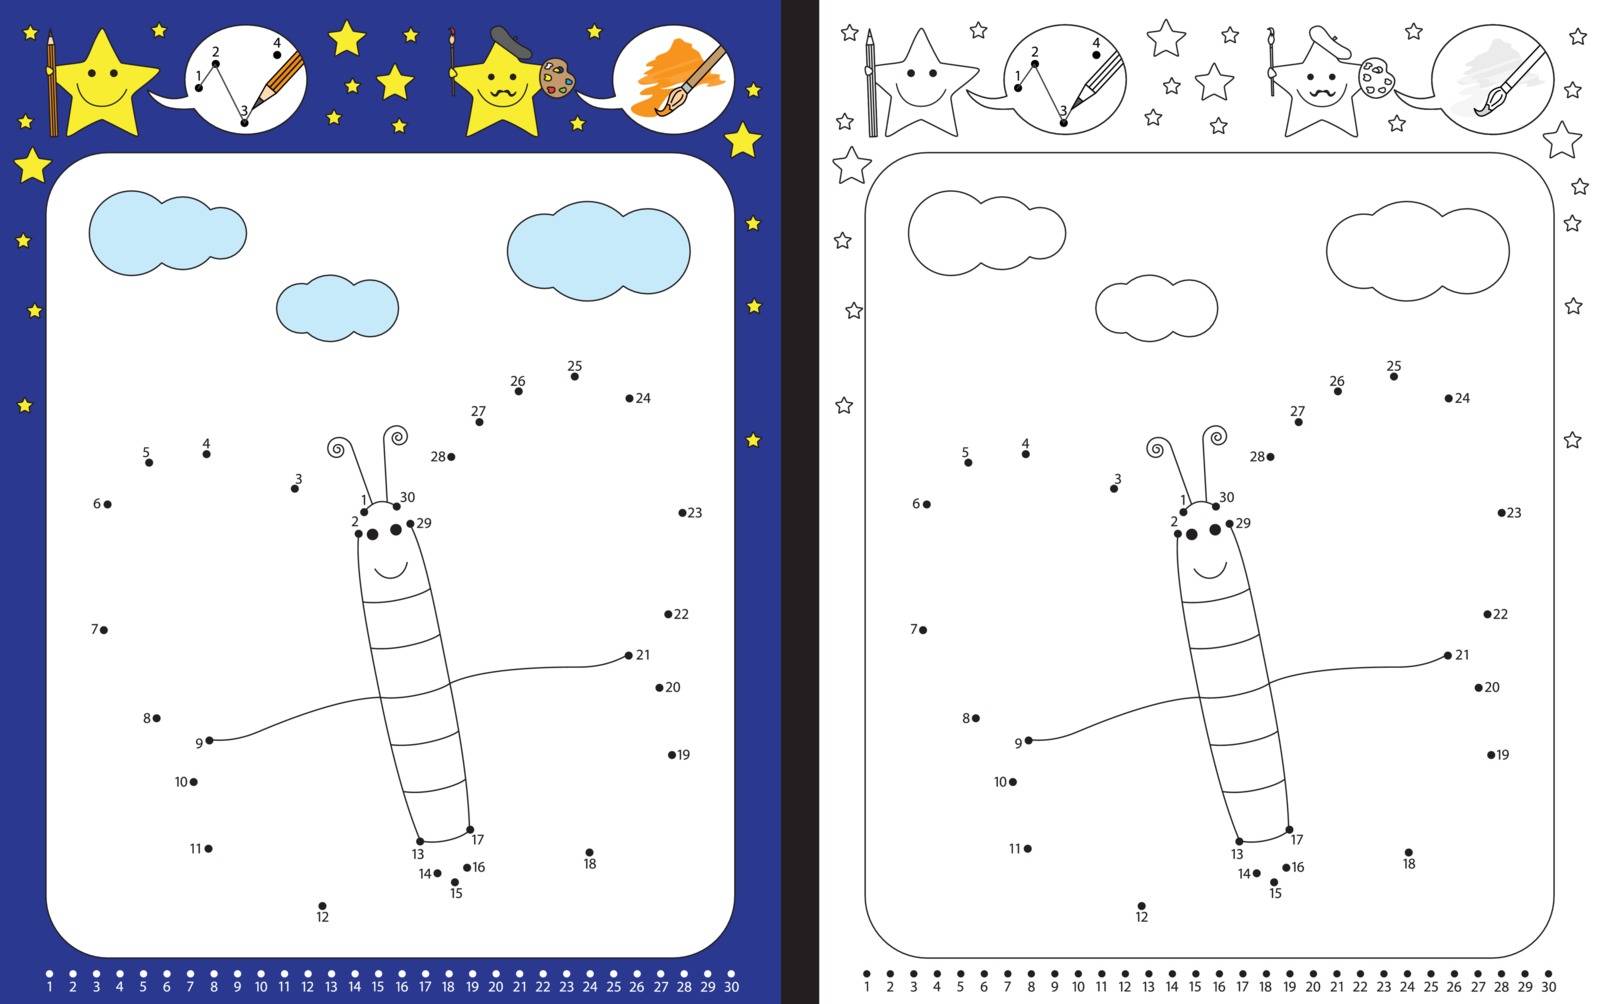 Preschool worksheet for practicing fine motor skills and recognising numbers - connecting dots by numbers - drawing illustration of a butterly